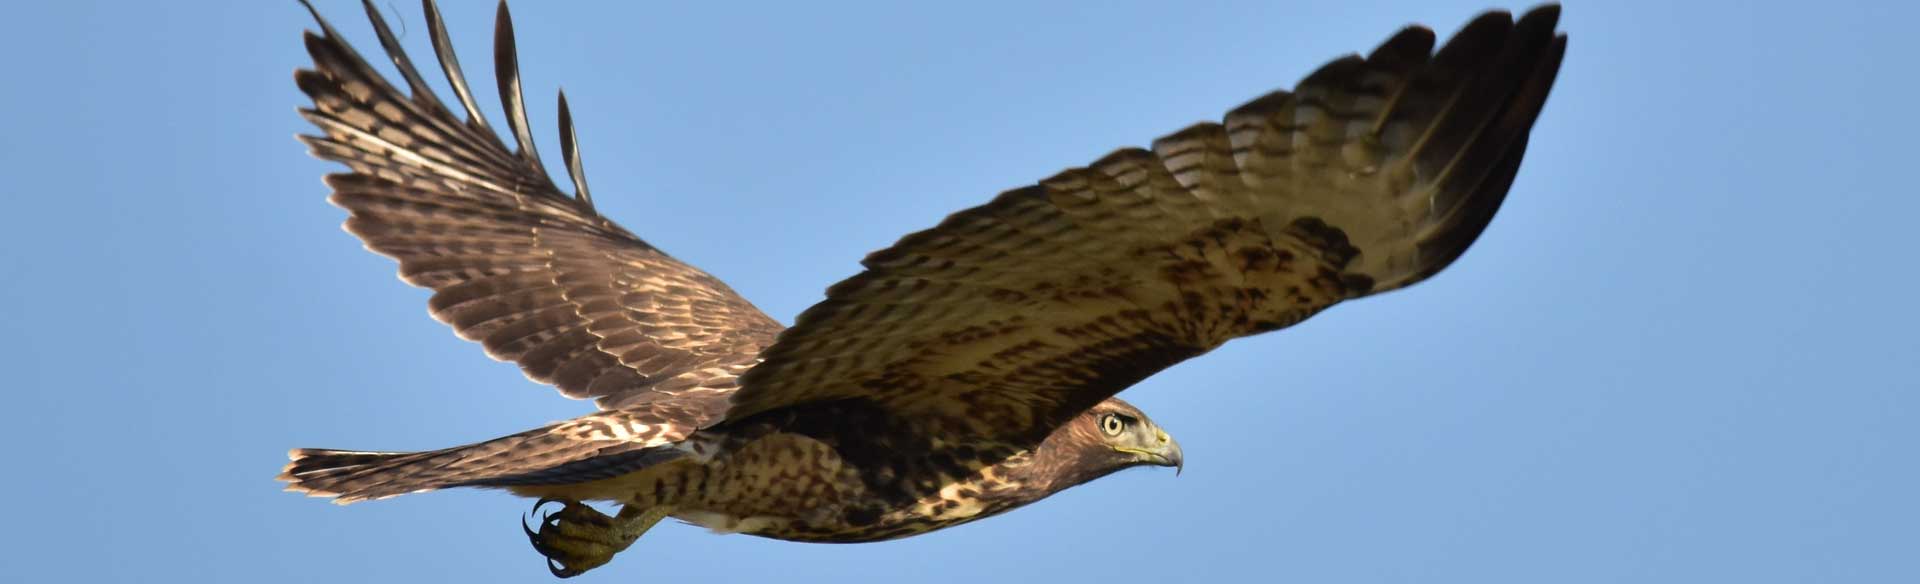 Flickr Photo of a dark red-tailed hawk by USFWS Mountain-Prairie